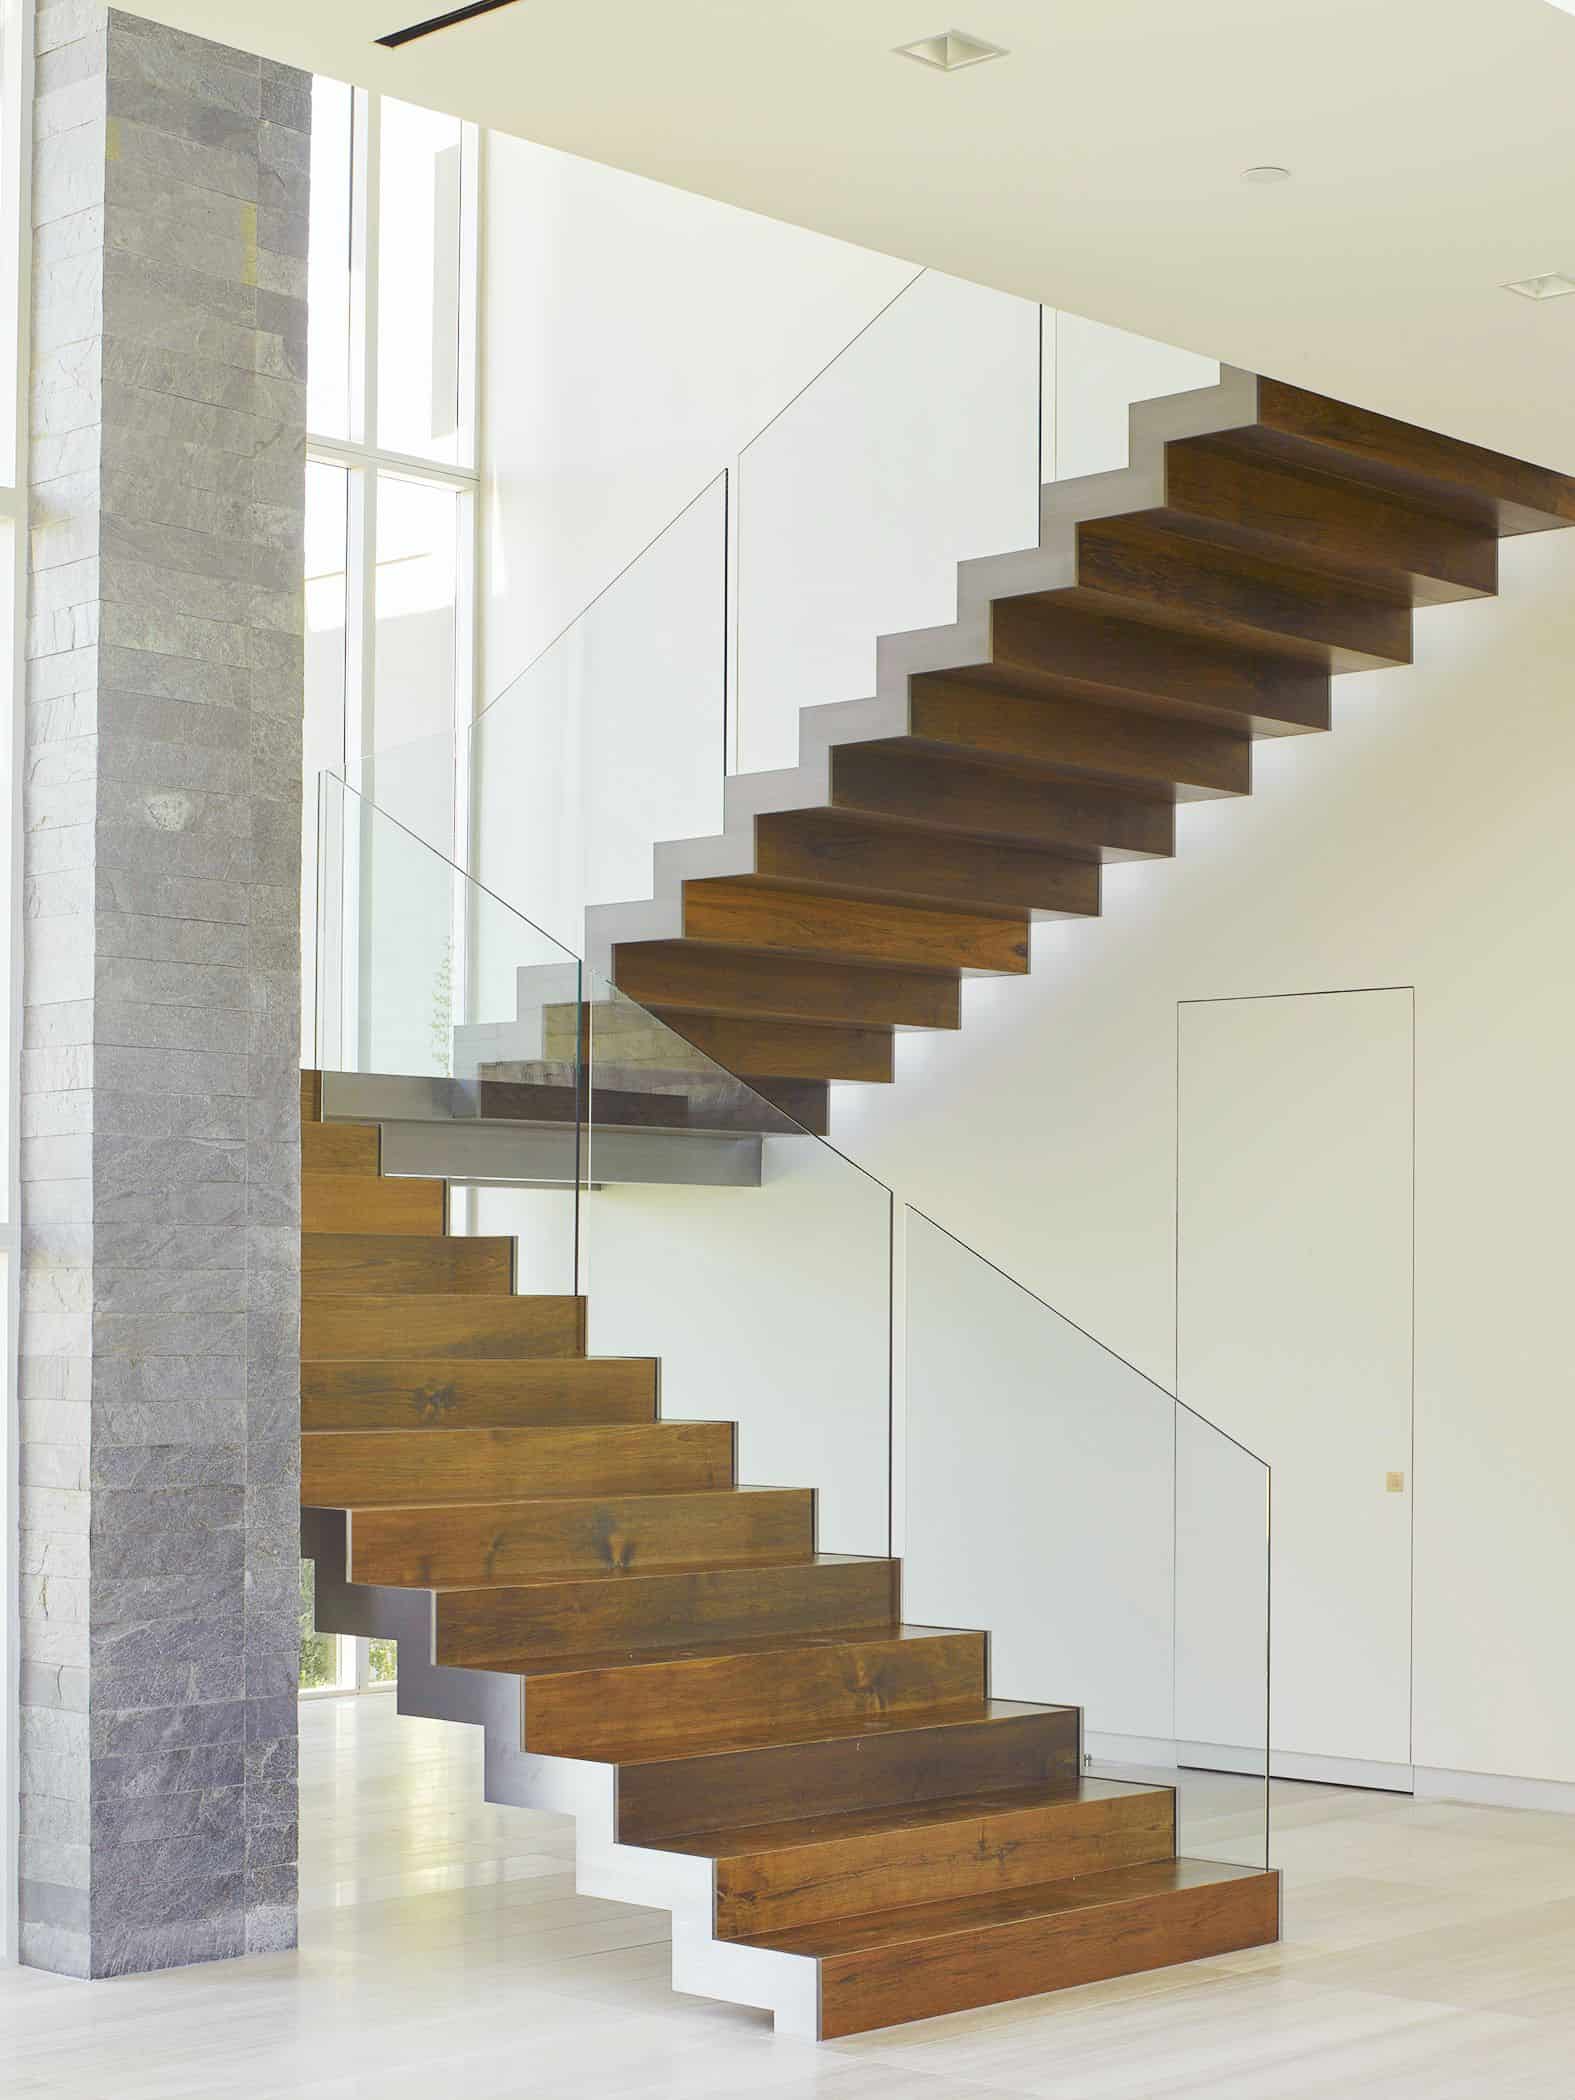 Architectural Metal Work - Floating metal staircase